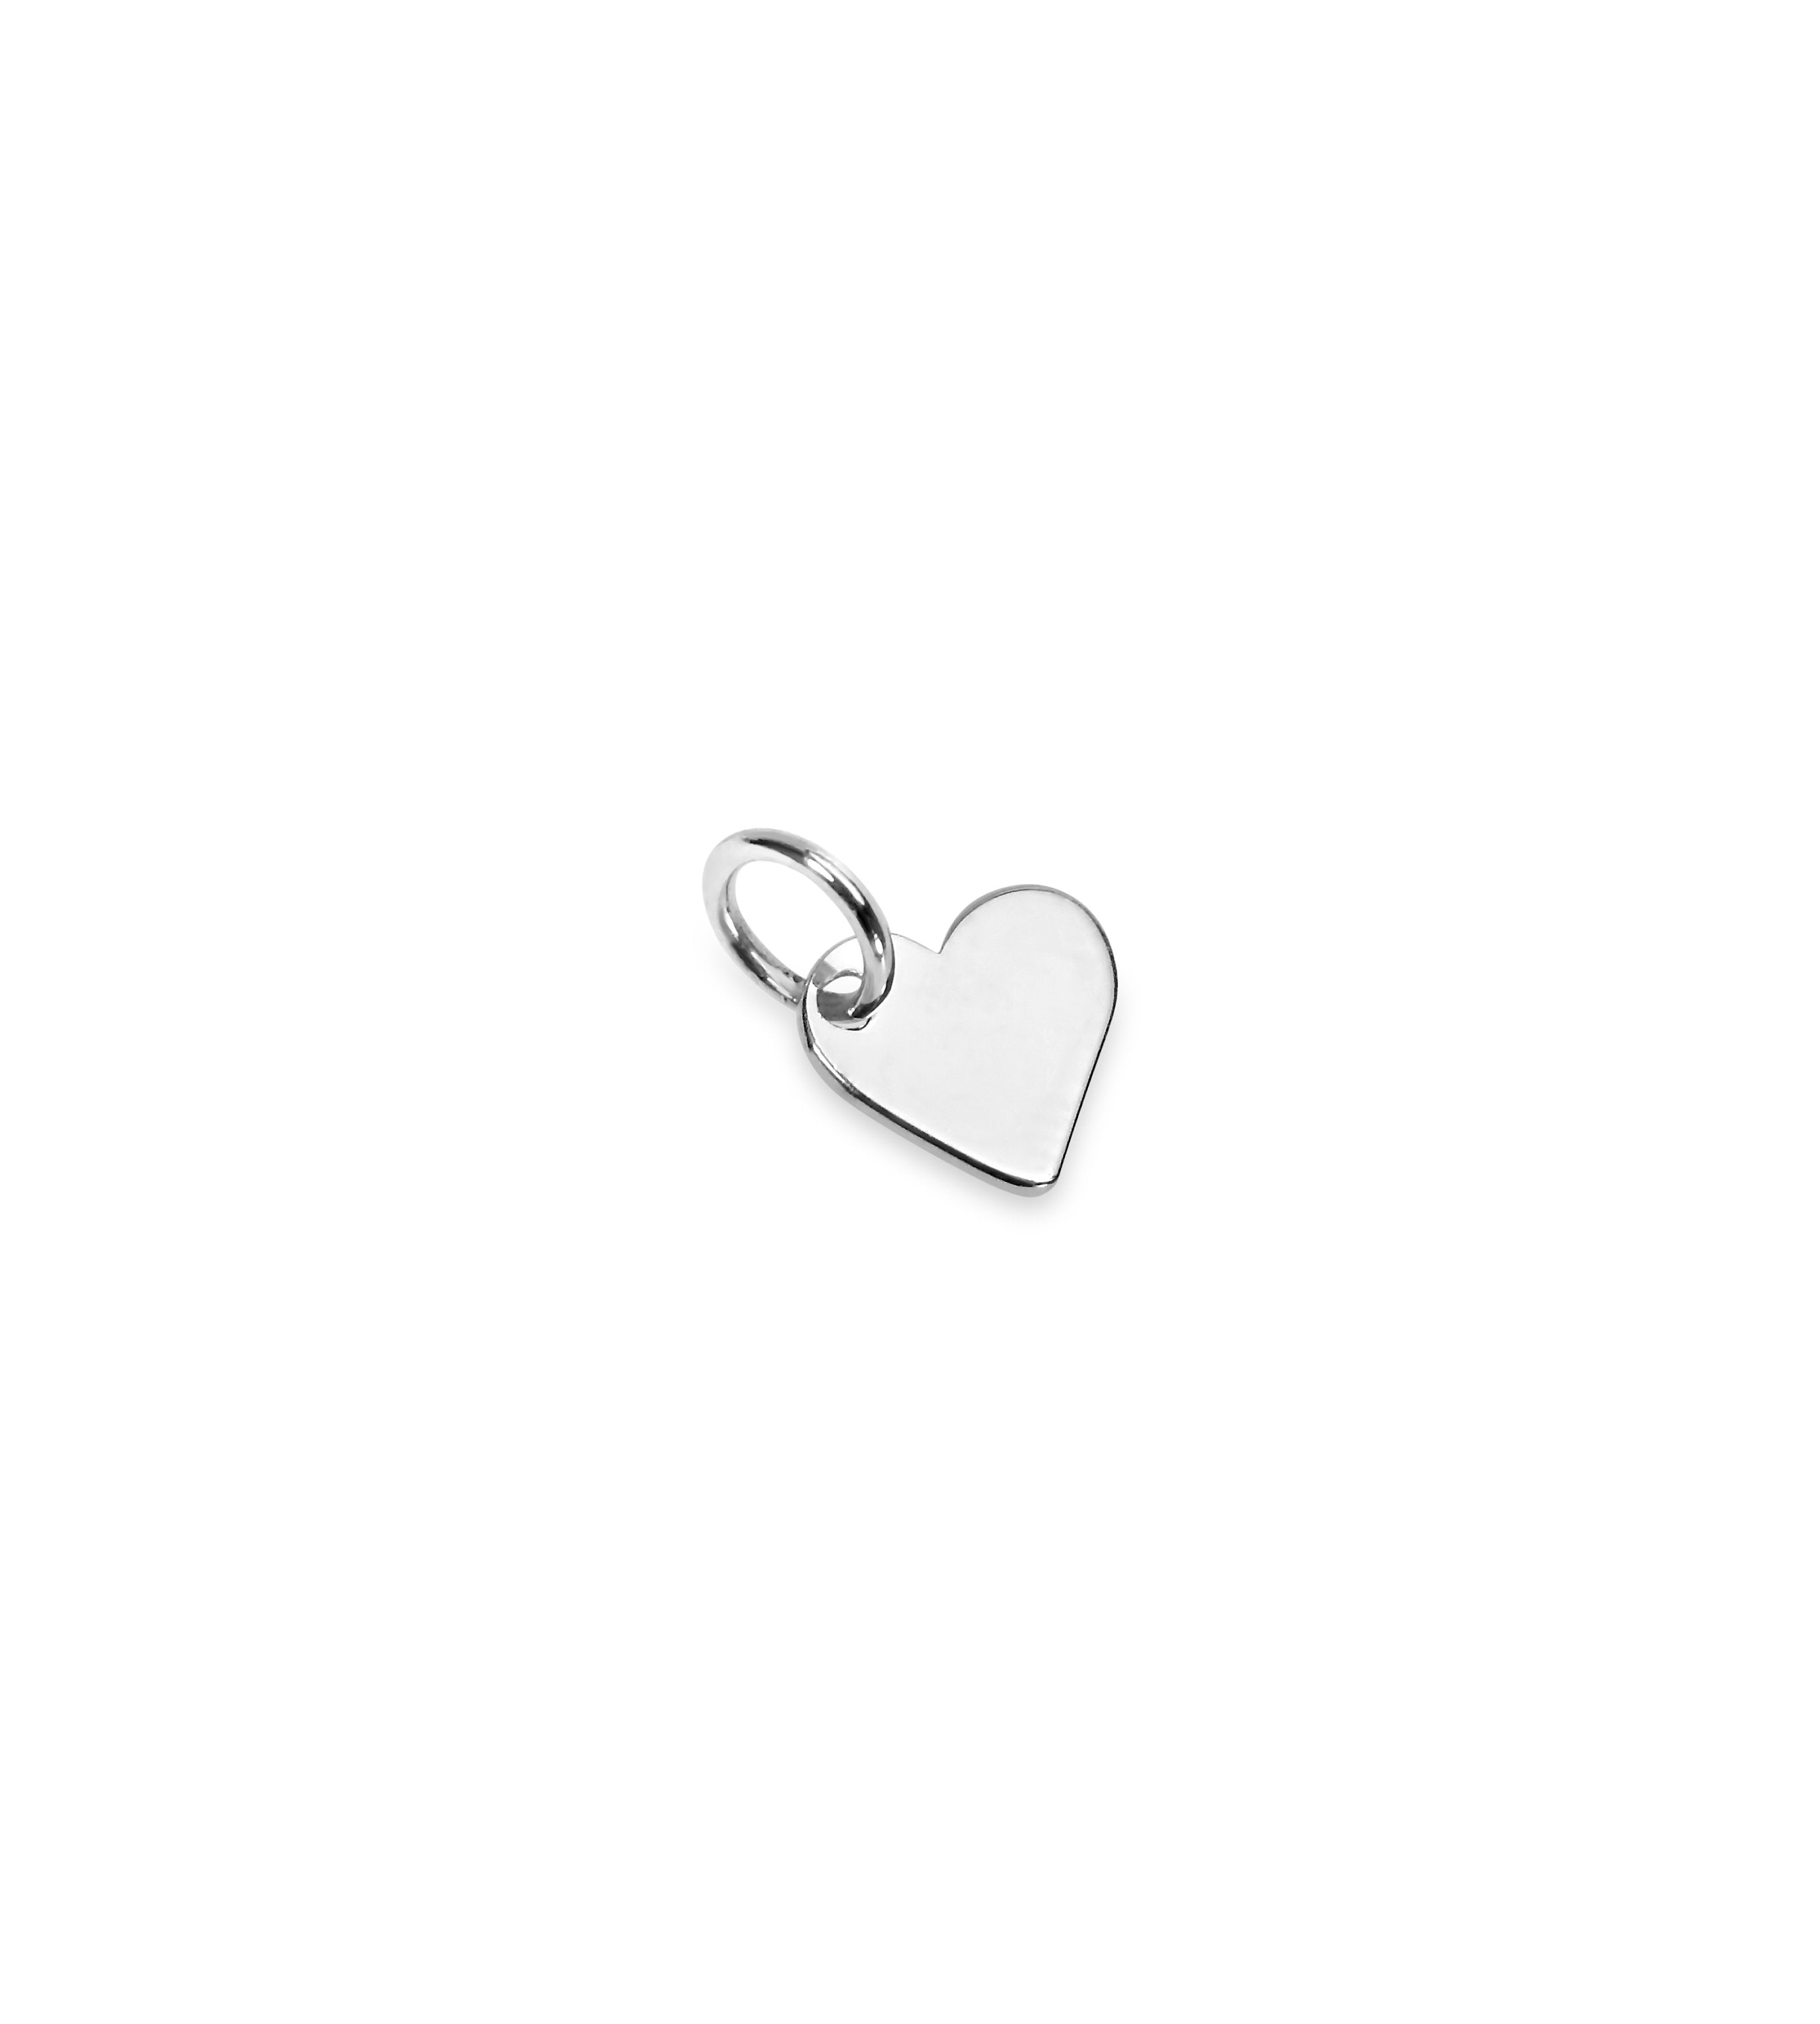 Add a Tiny Heart Charm *NOT for sale individually*